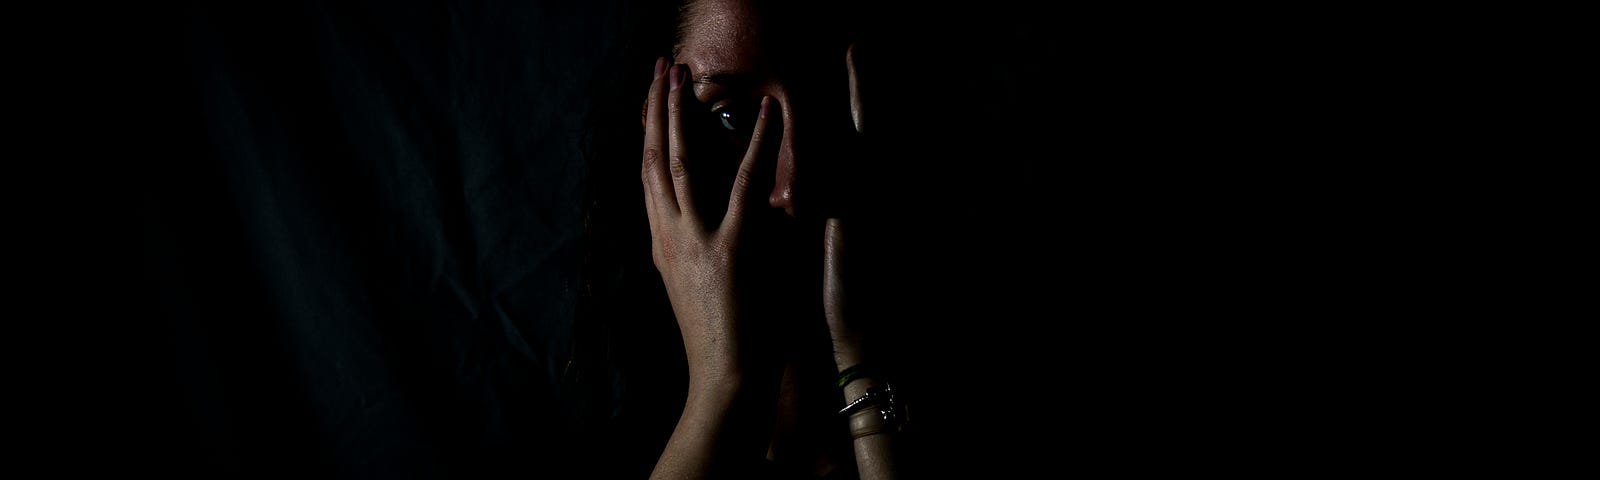 a very dark picture of a woman with her hands on her face. One eye visible, between the fingers of her right hand. the rest of her is in shadows.